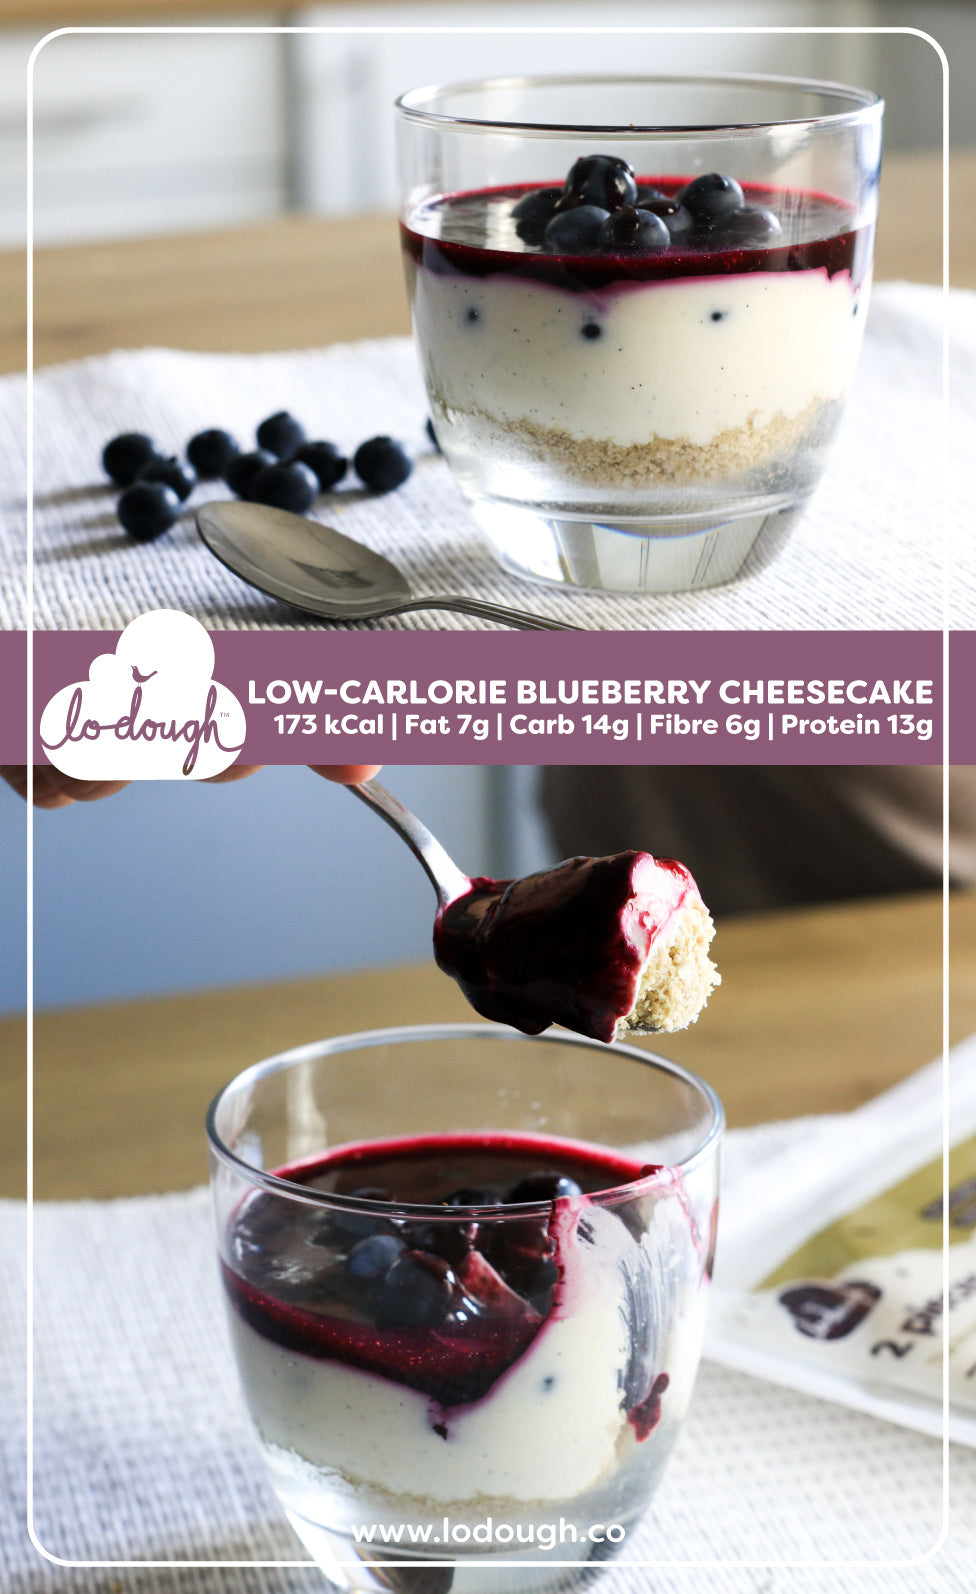 Low-Calorie Blueberry Cheesecake | Low-Calorie Dessert Recipes from Lo-Dough